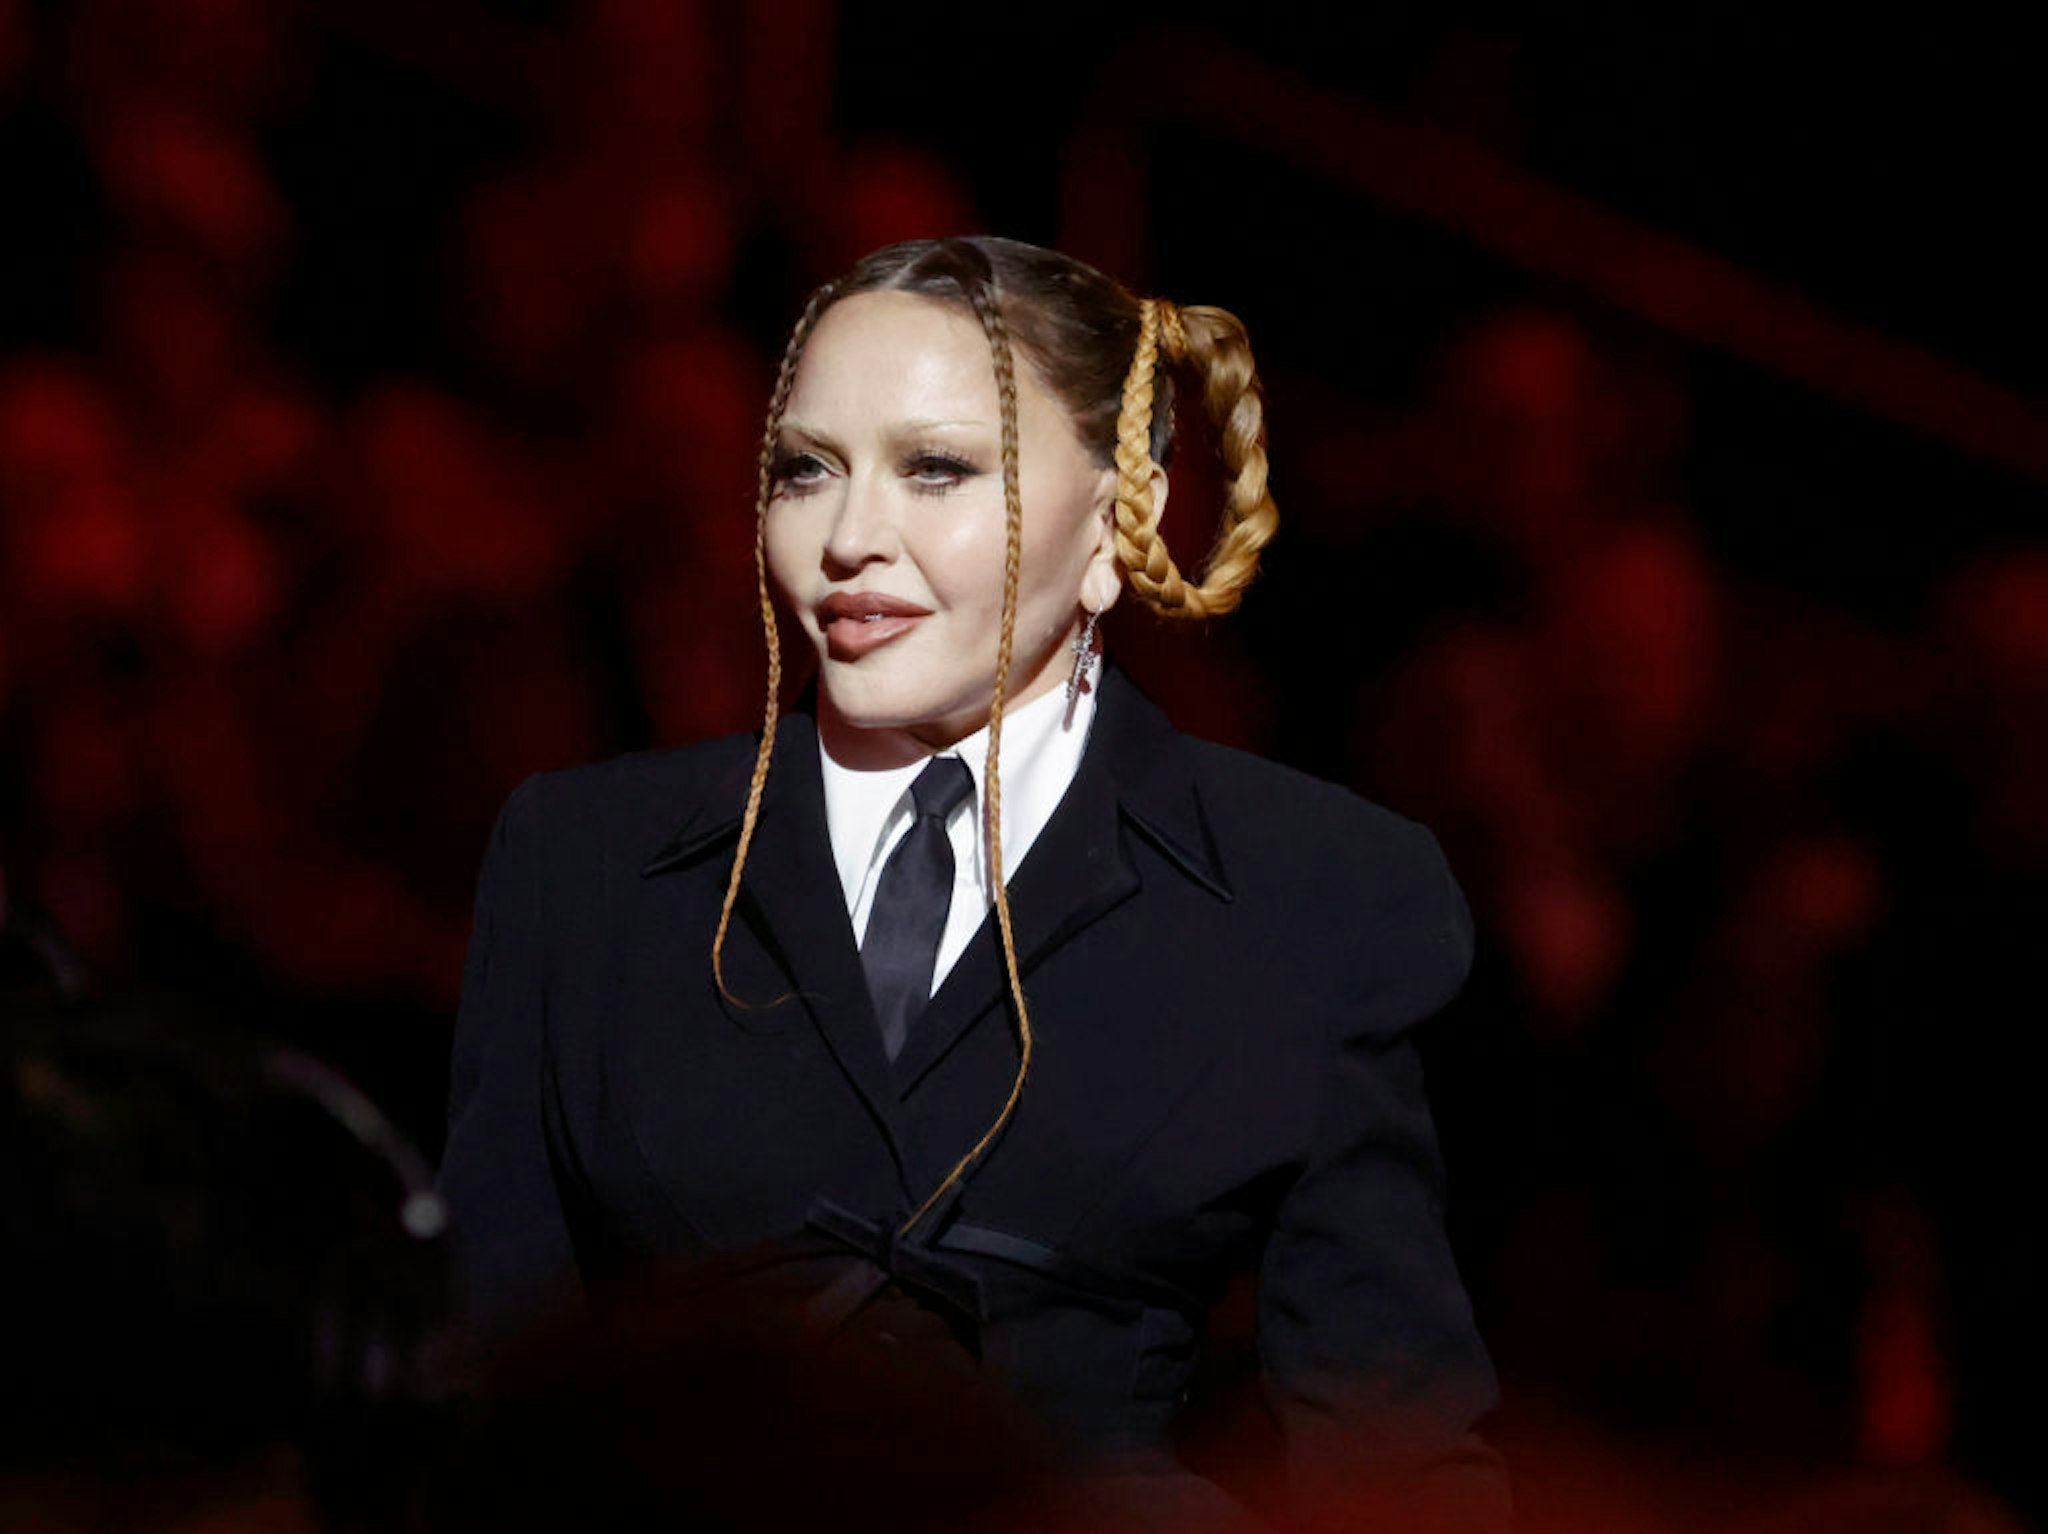 LOS ANGELES, CALIFORNIA - FEBRUARY 05: (FOR EDITORIAL USE ONLY) Madonna speaks onstage during the 65th GRAMMY Awards at Crypto.com Arena on February 05, 2023 in Los Angeles, California. (Photo by Frazer Harrison/Getty Images)